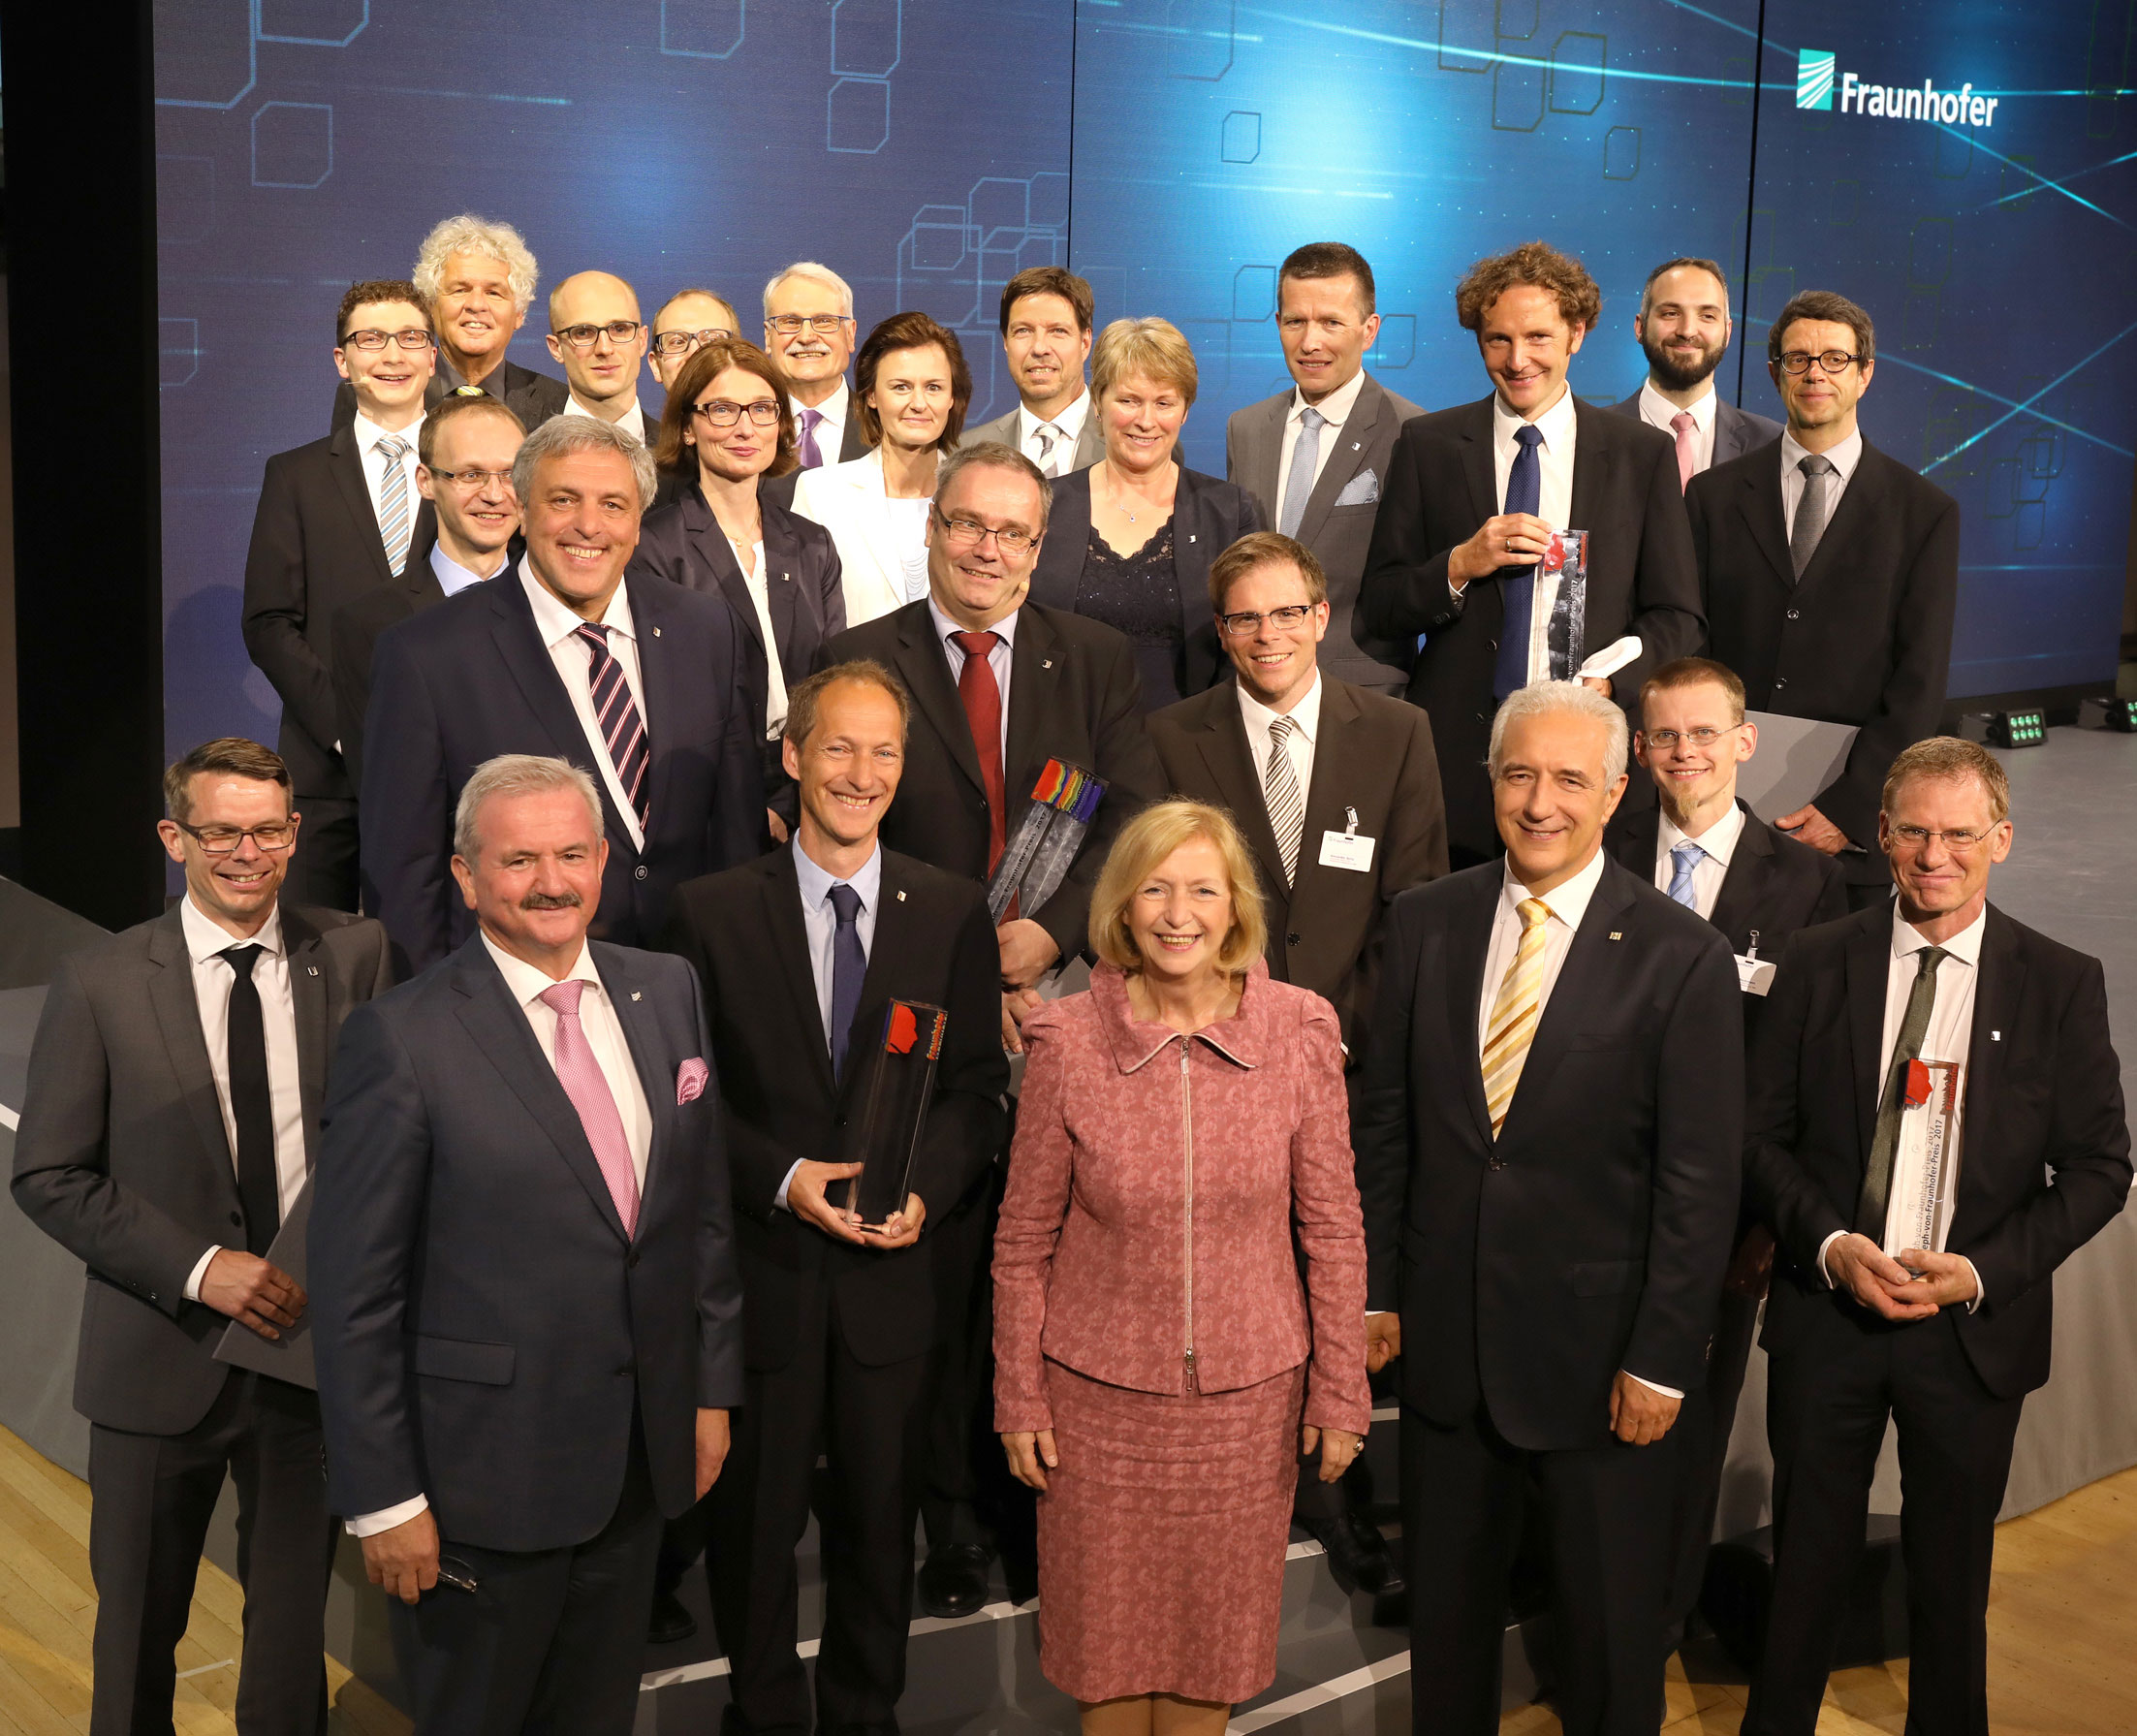 Prof. Reimund Neugebauer, President of the Fraunhofer-Gesellschaft, Prof. Dr. Johanna Wanka, Federal Minister for Education and Research, Stanislaw Tillich, Prime Minister of the Free State of Saxony (from left to right) and all winners 2017.